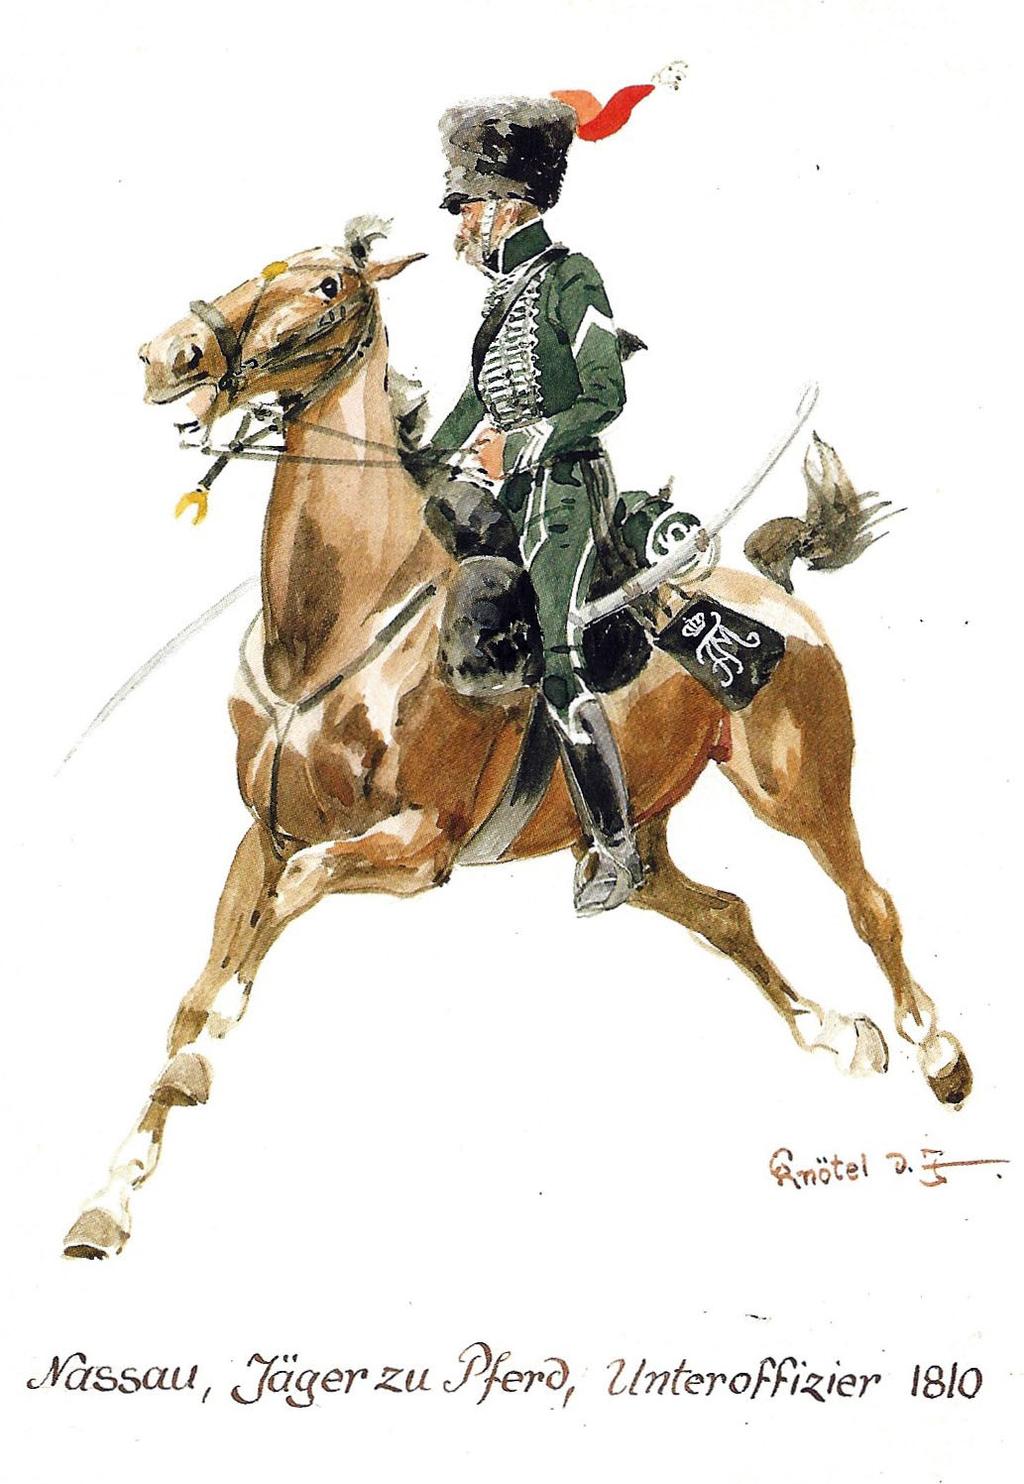 chasseurs were of black sheepskin; the officers' were of dark green cloth edged with silver lace.